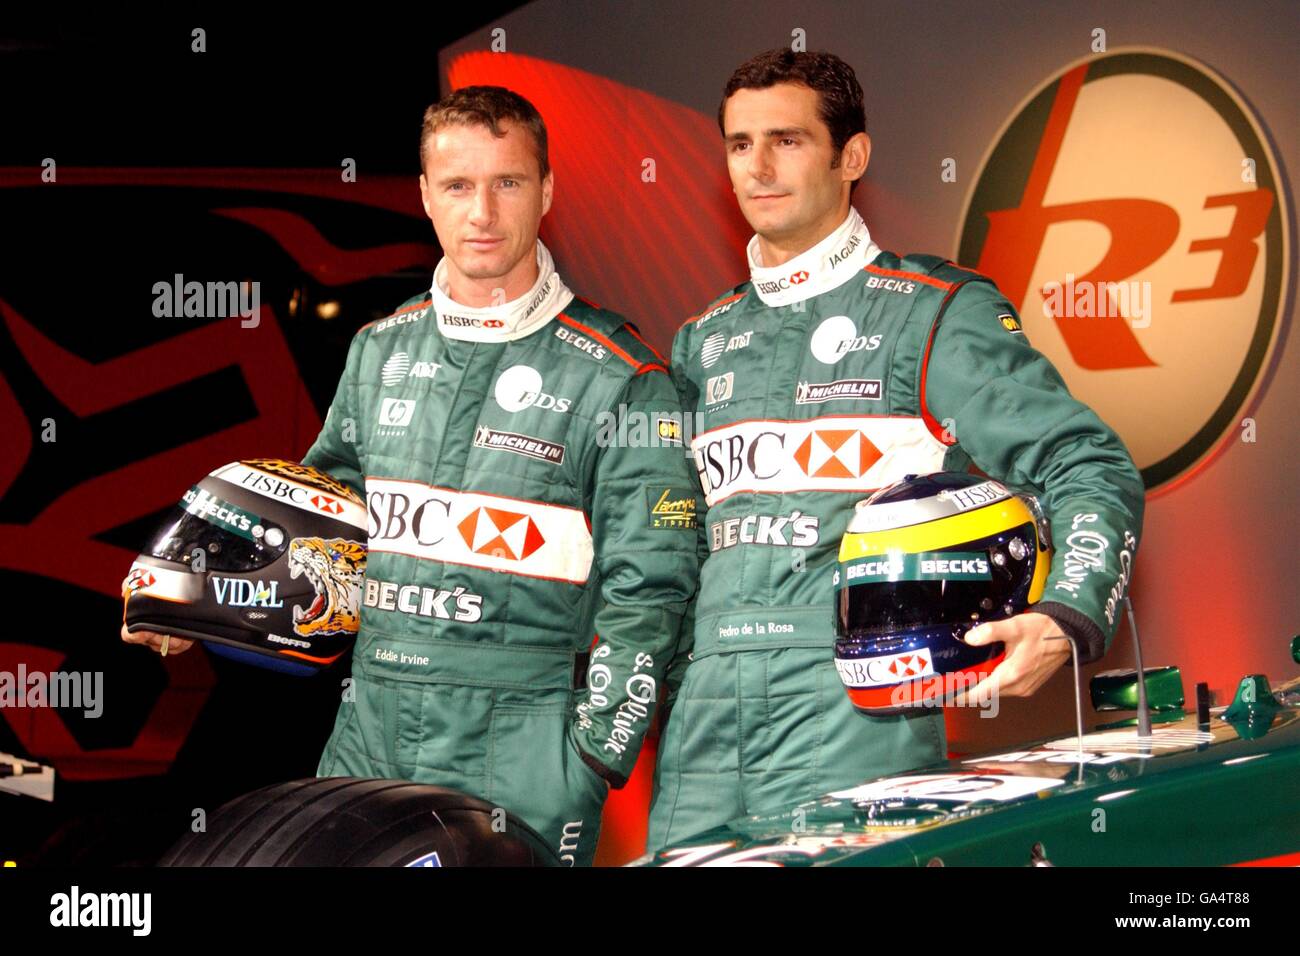 Eddie Irvine and Pedro De La Rosa at the launch of the 2002 Jaguar R3 car at the team's factory Stock Photo